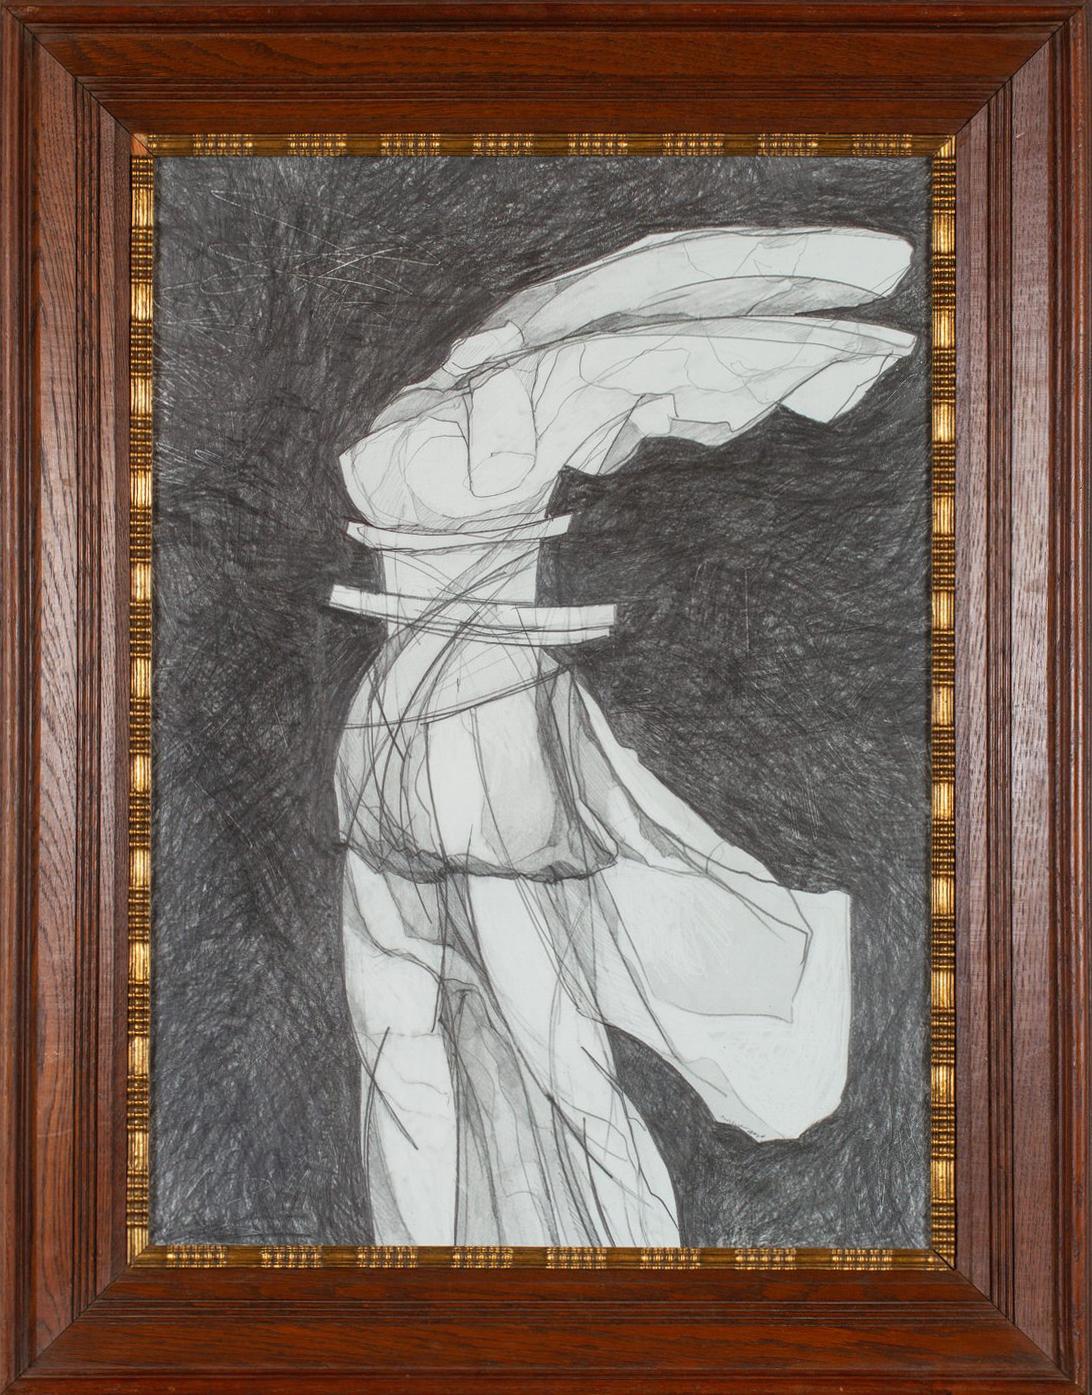 Nike VI: Figurative Abstract Graphite Drawing of Goddess Nike, Antique Frame